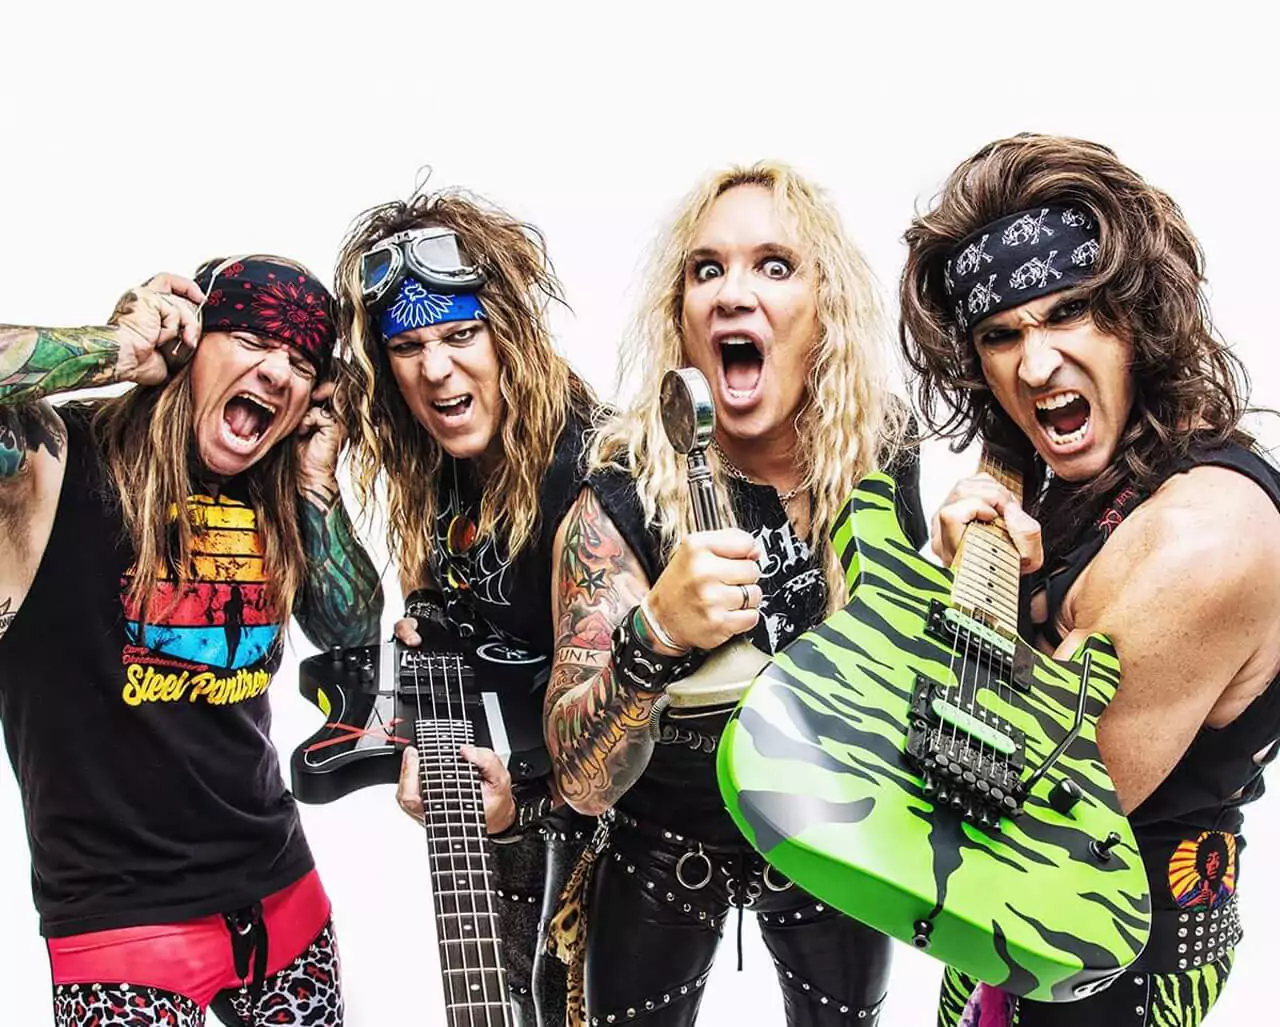 Radio Station Removes Steel Panther After Playing "Gloryhole" on Live